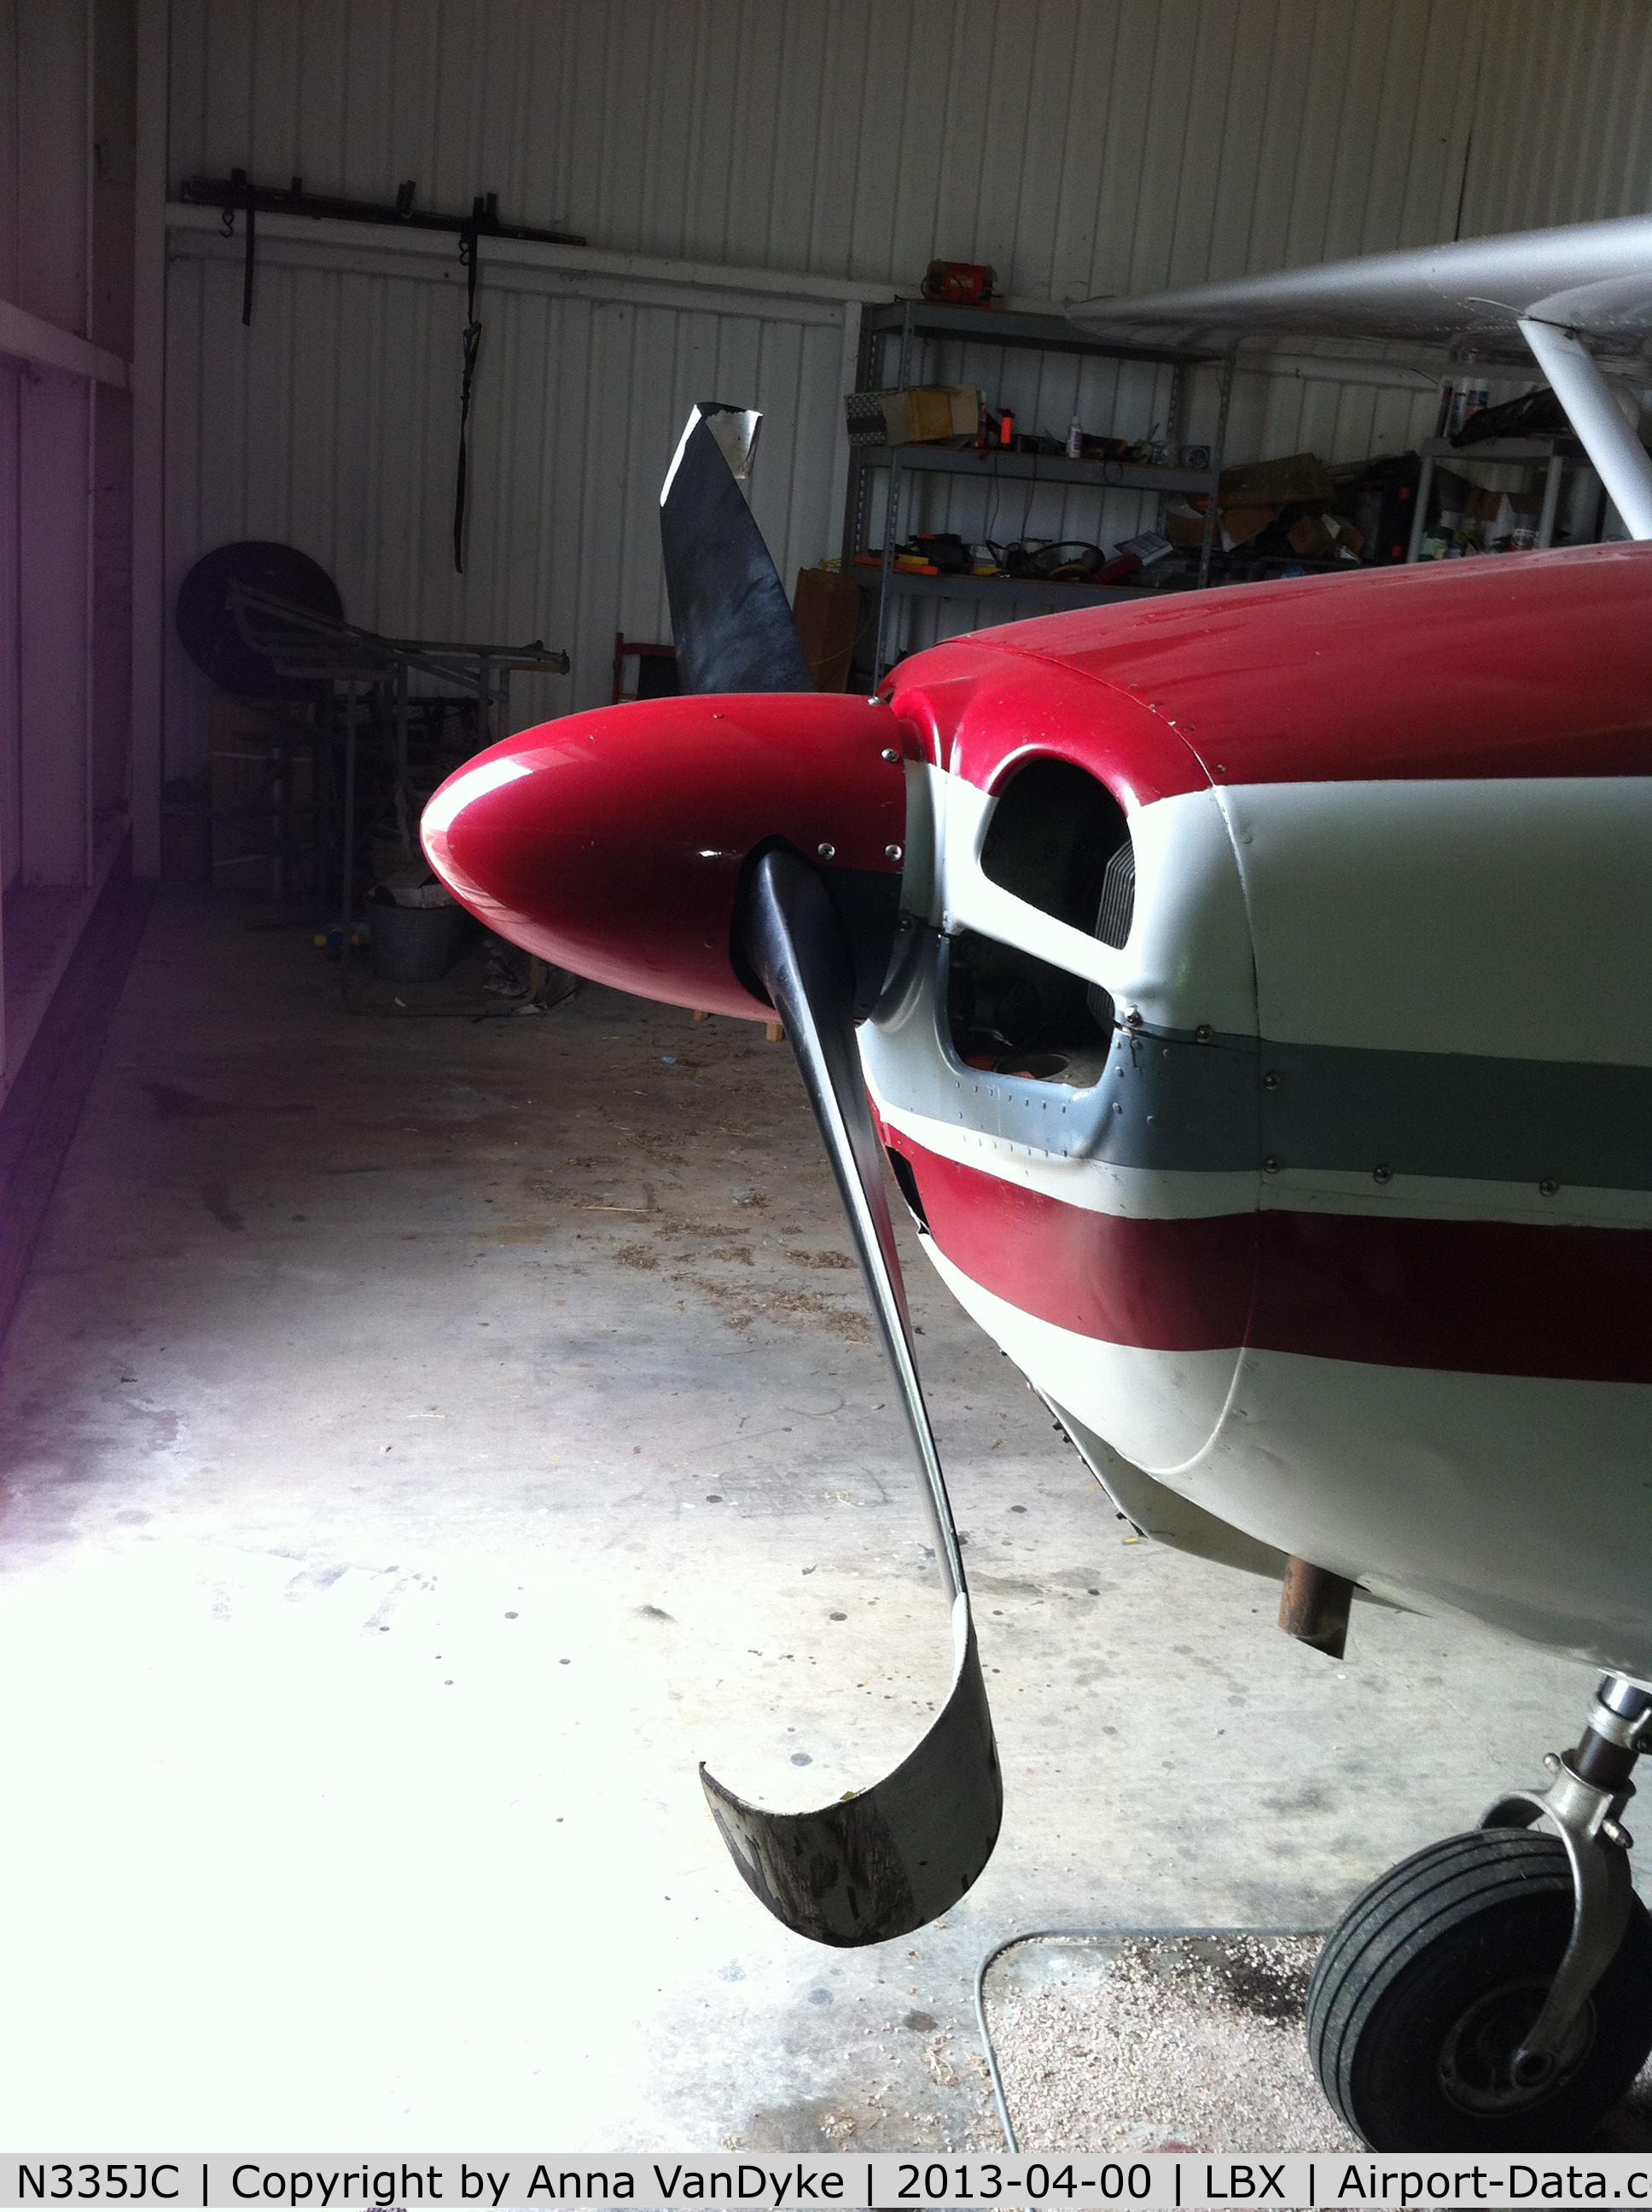 N335JC, 1956 Cessna 172 C/N 28785, Prop strike occured after our Sun and Fun trip.